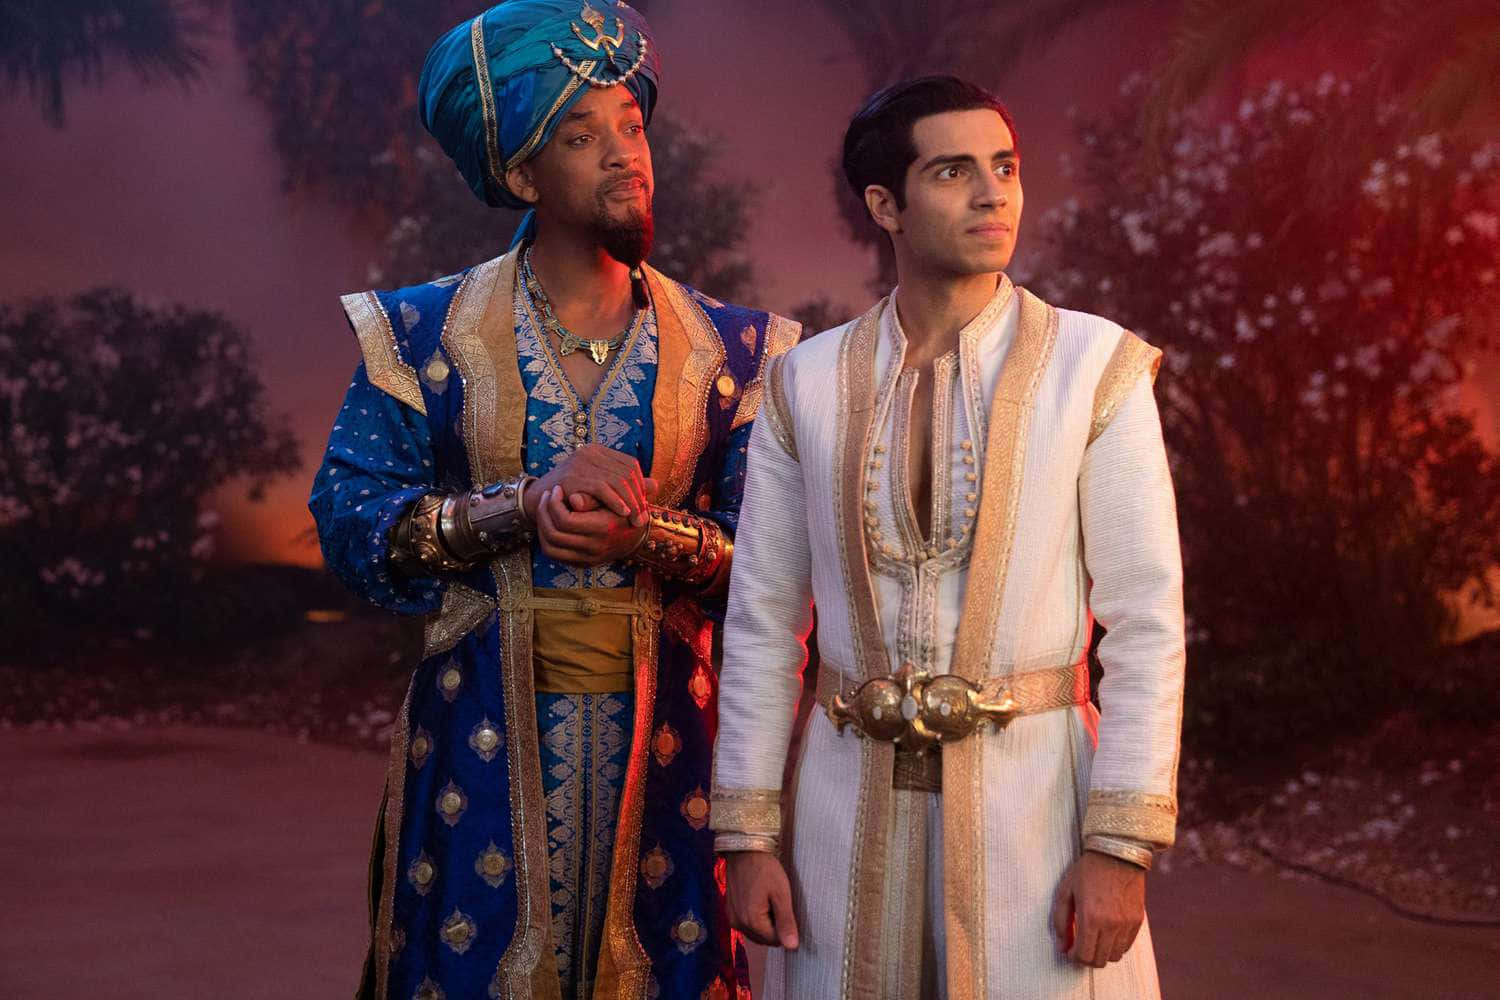 Fall into an adventure with Aladdin